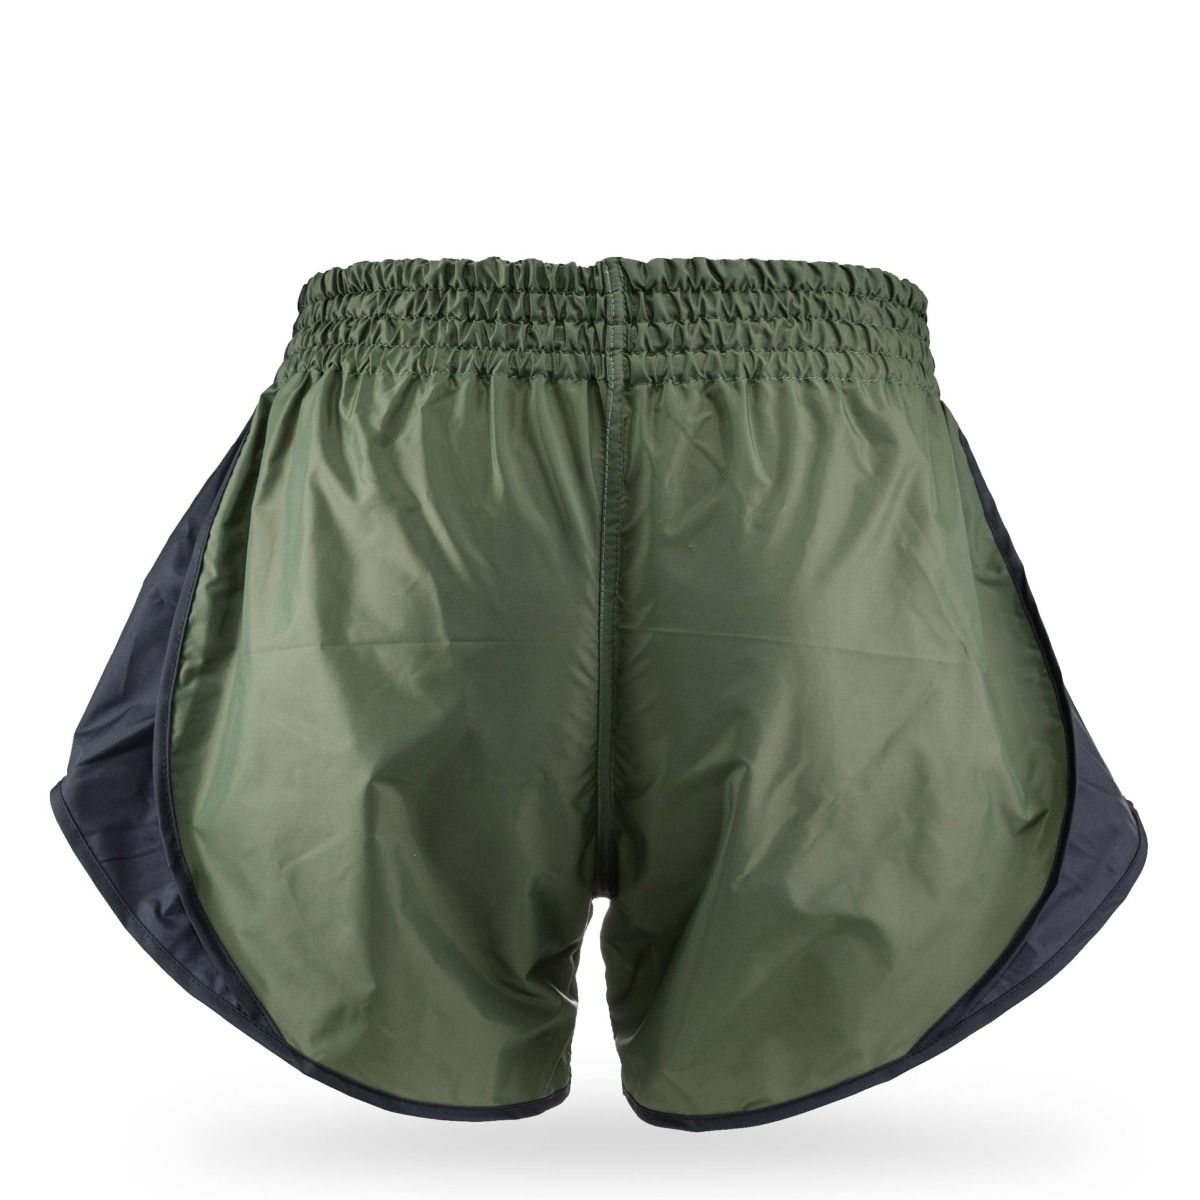 RETRO HYBRID GREEN  These all round trunks are handmade in Thailand . The shape allows great movement for the legs & they are